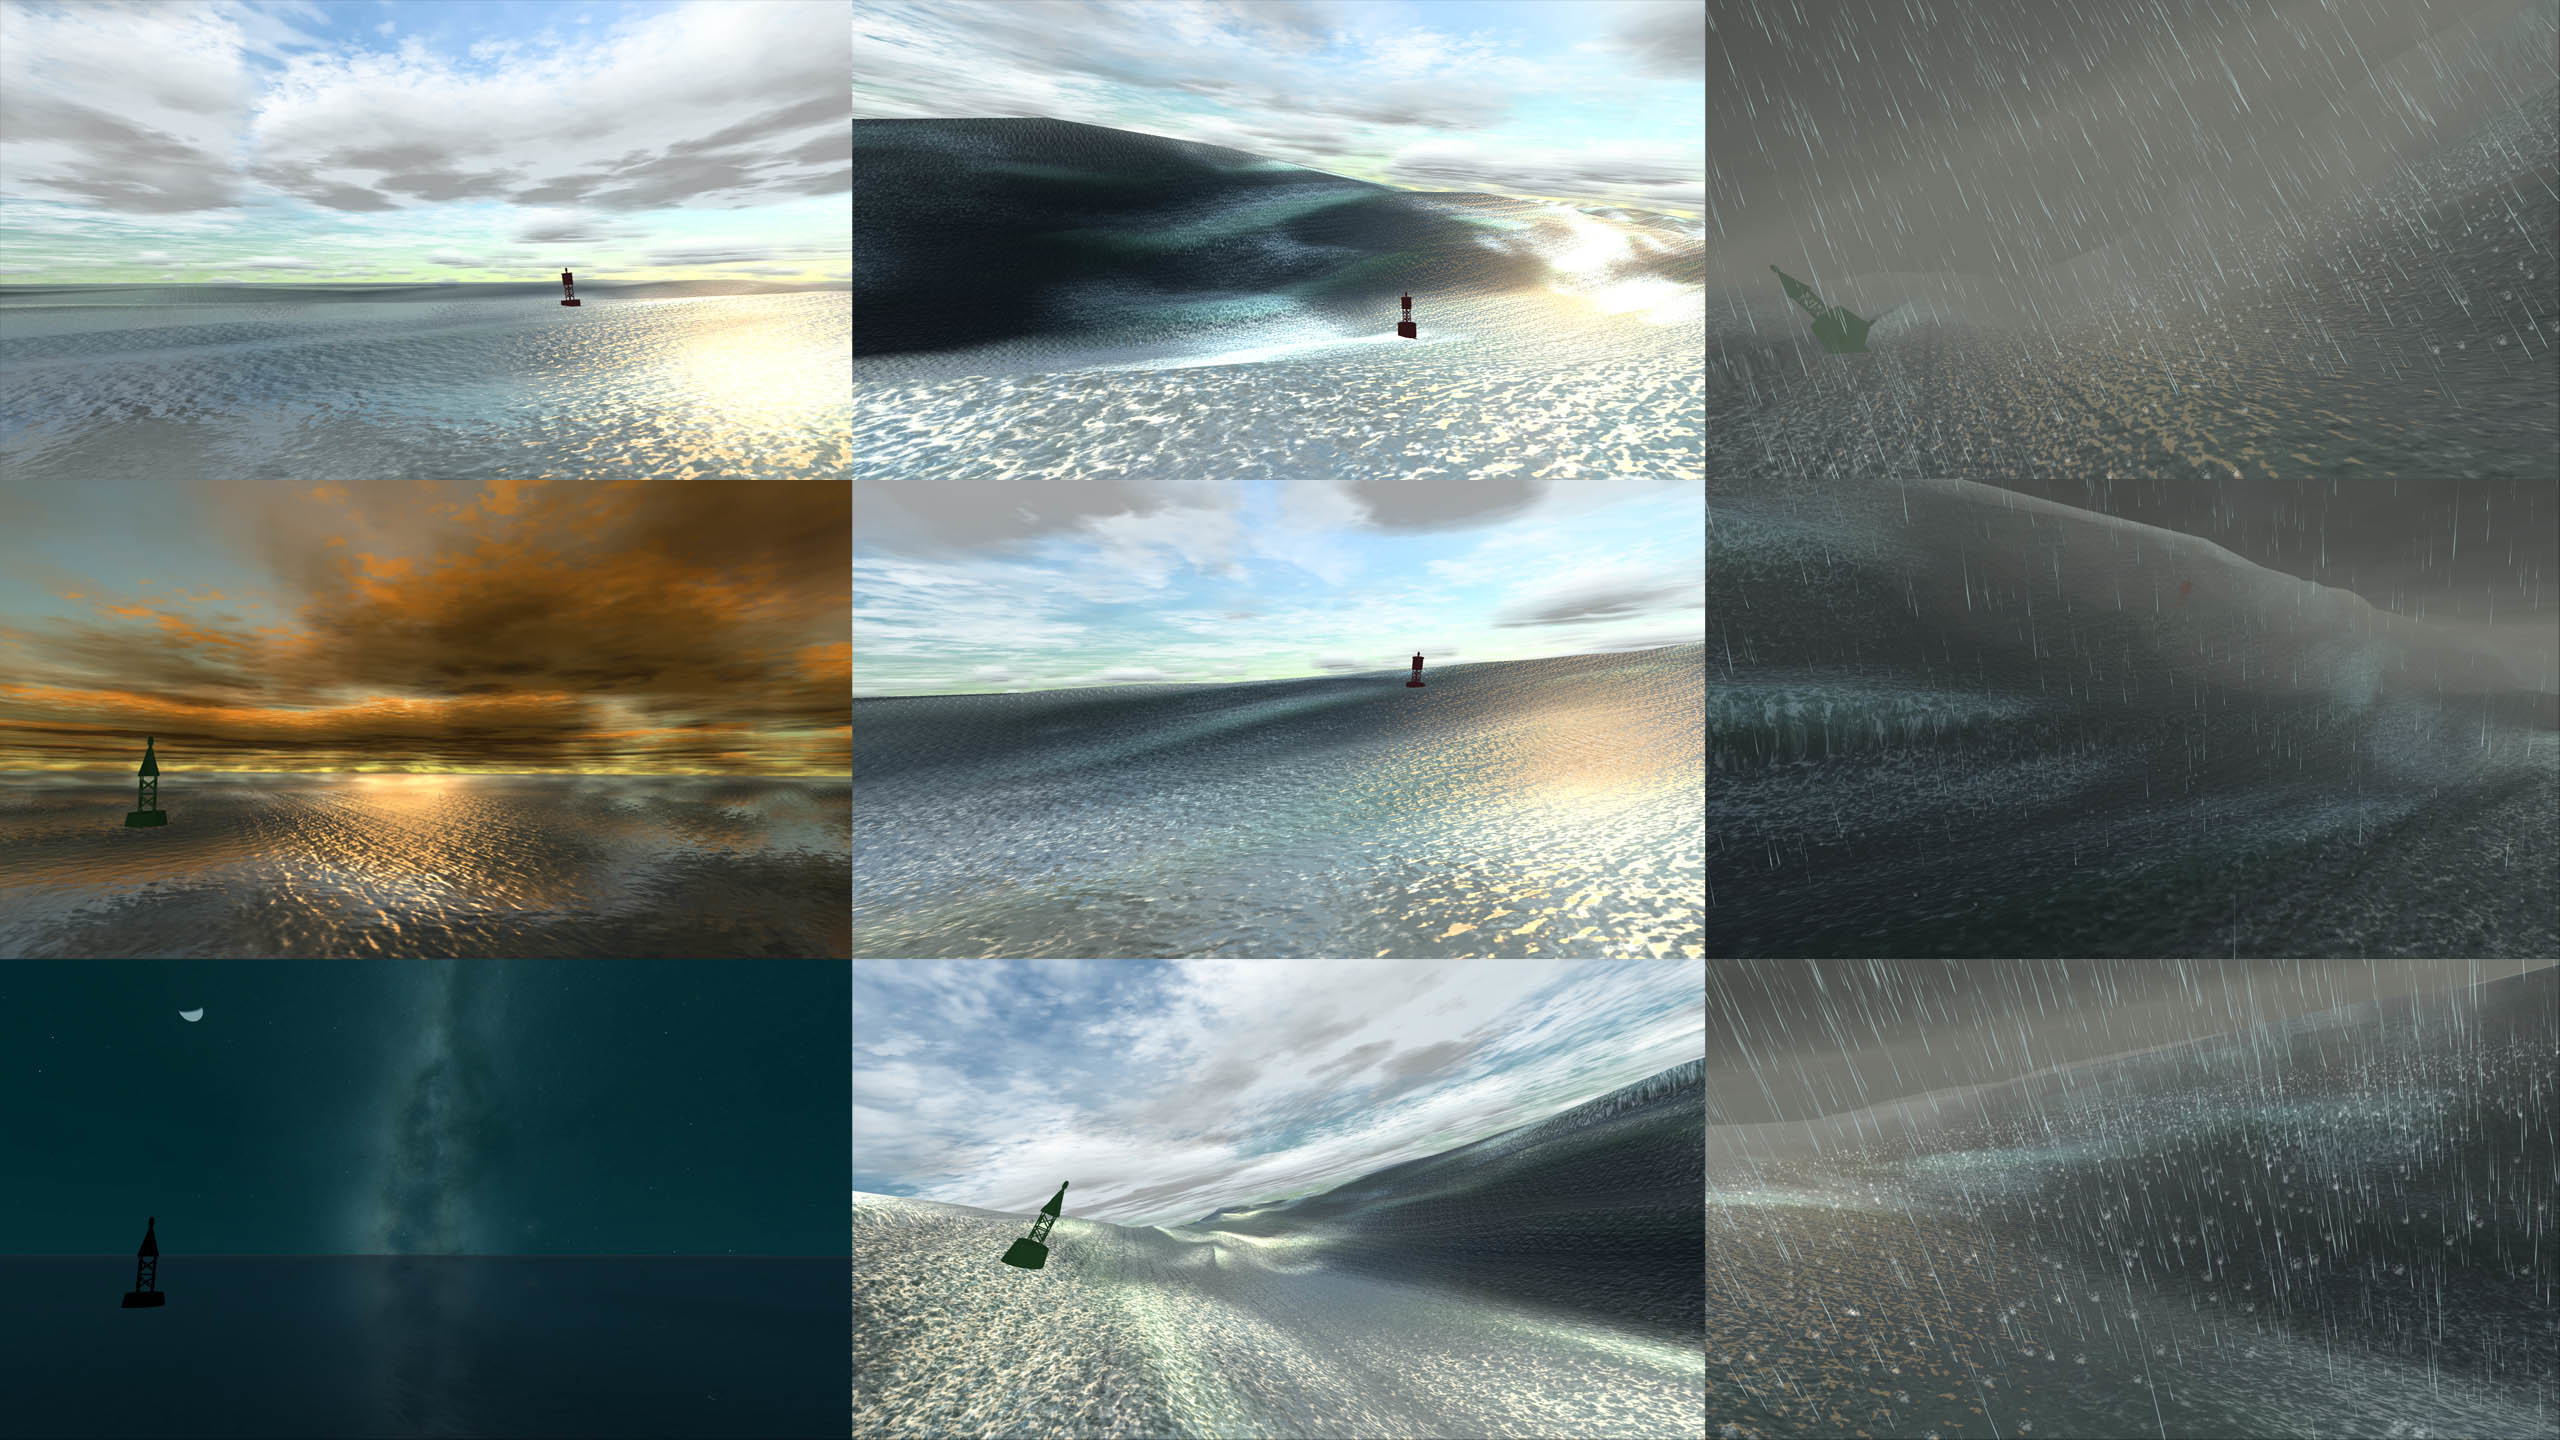 Sky and ocean simulation. Some examples of the combined sky and ocean for a new sailing simulator